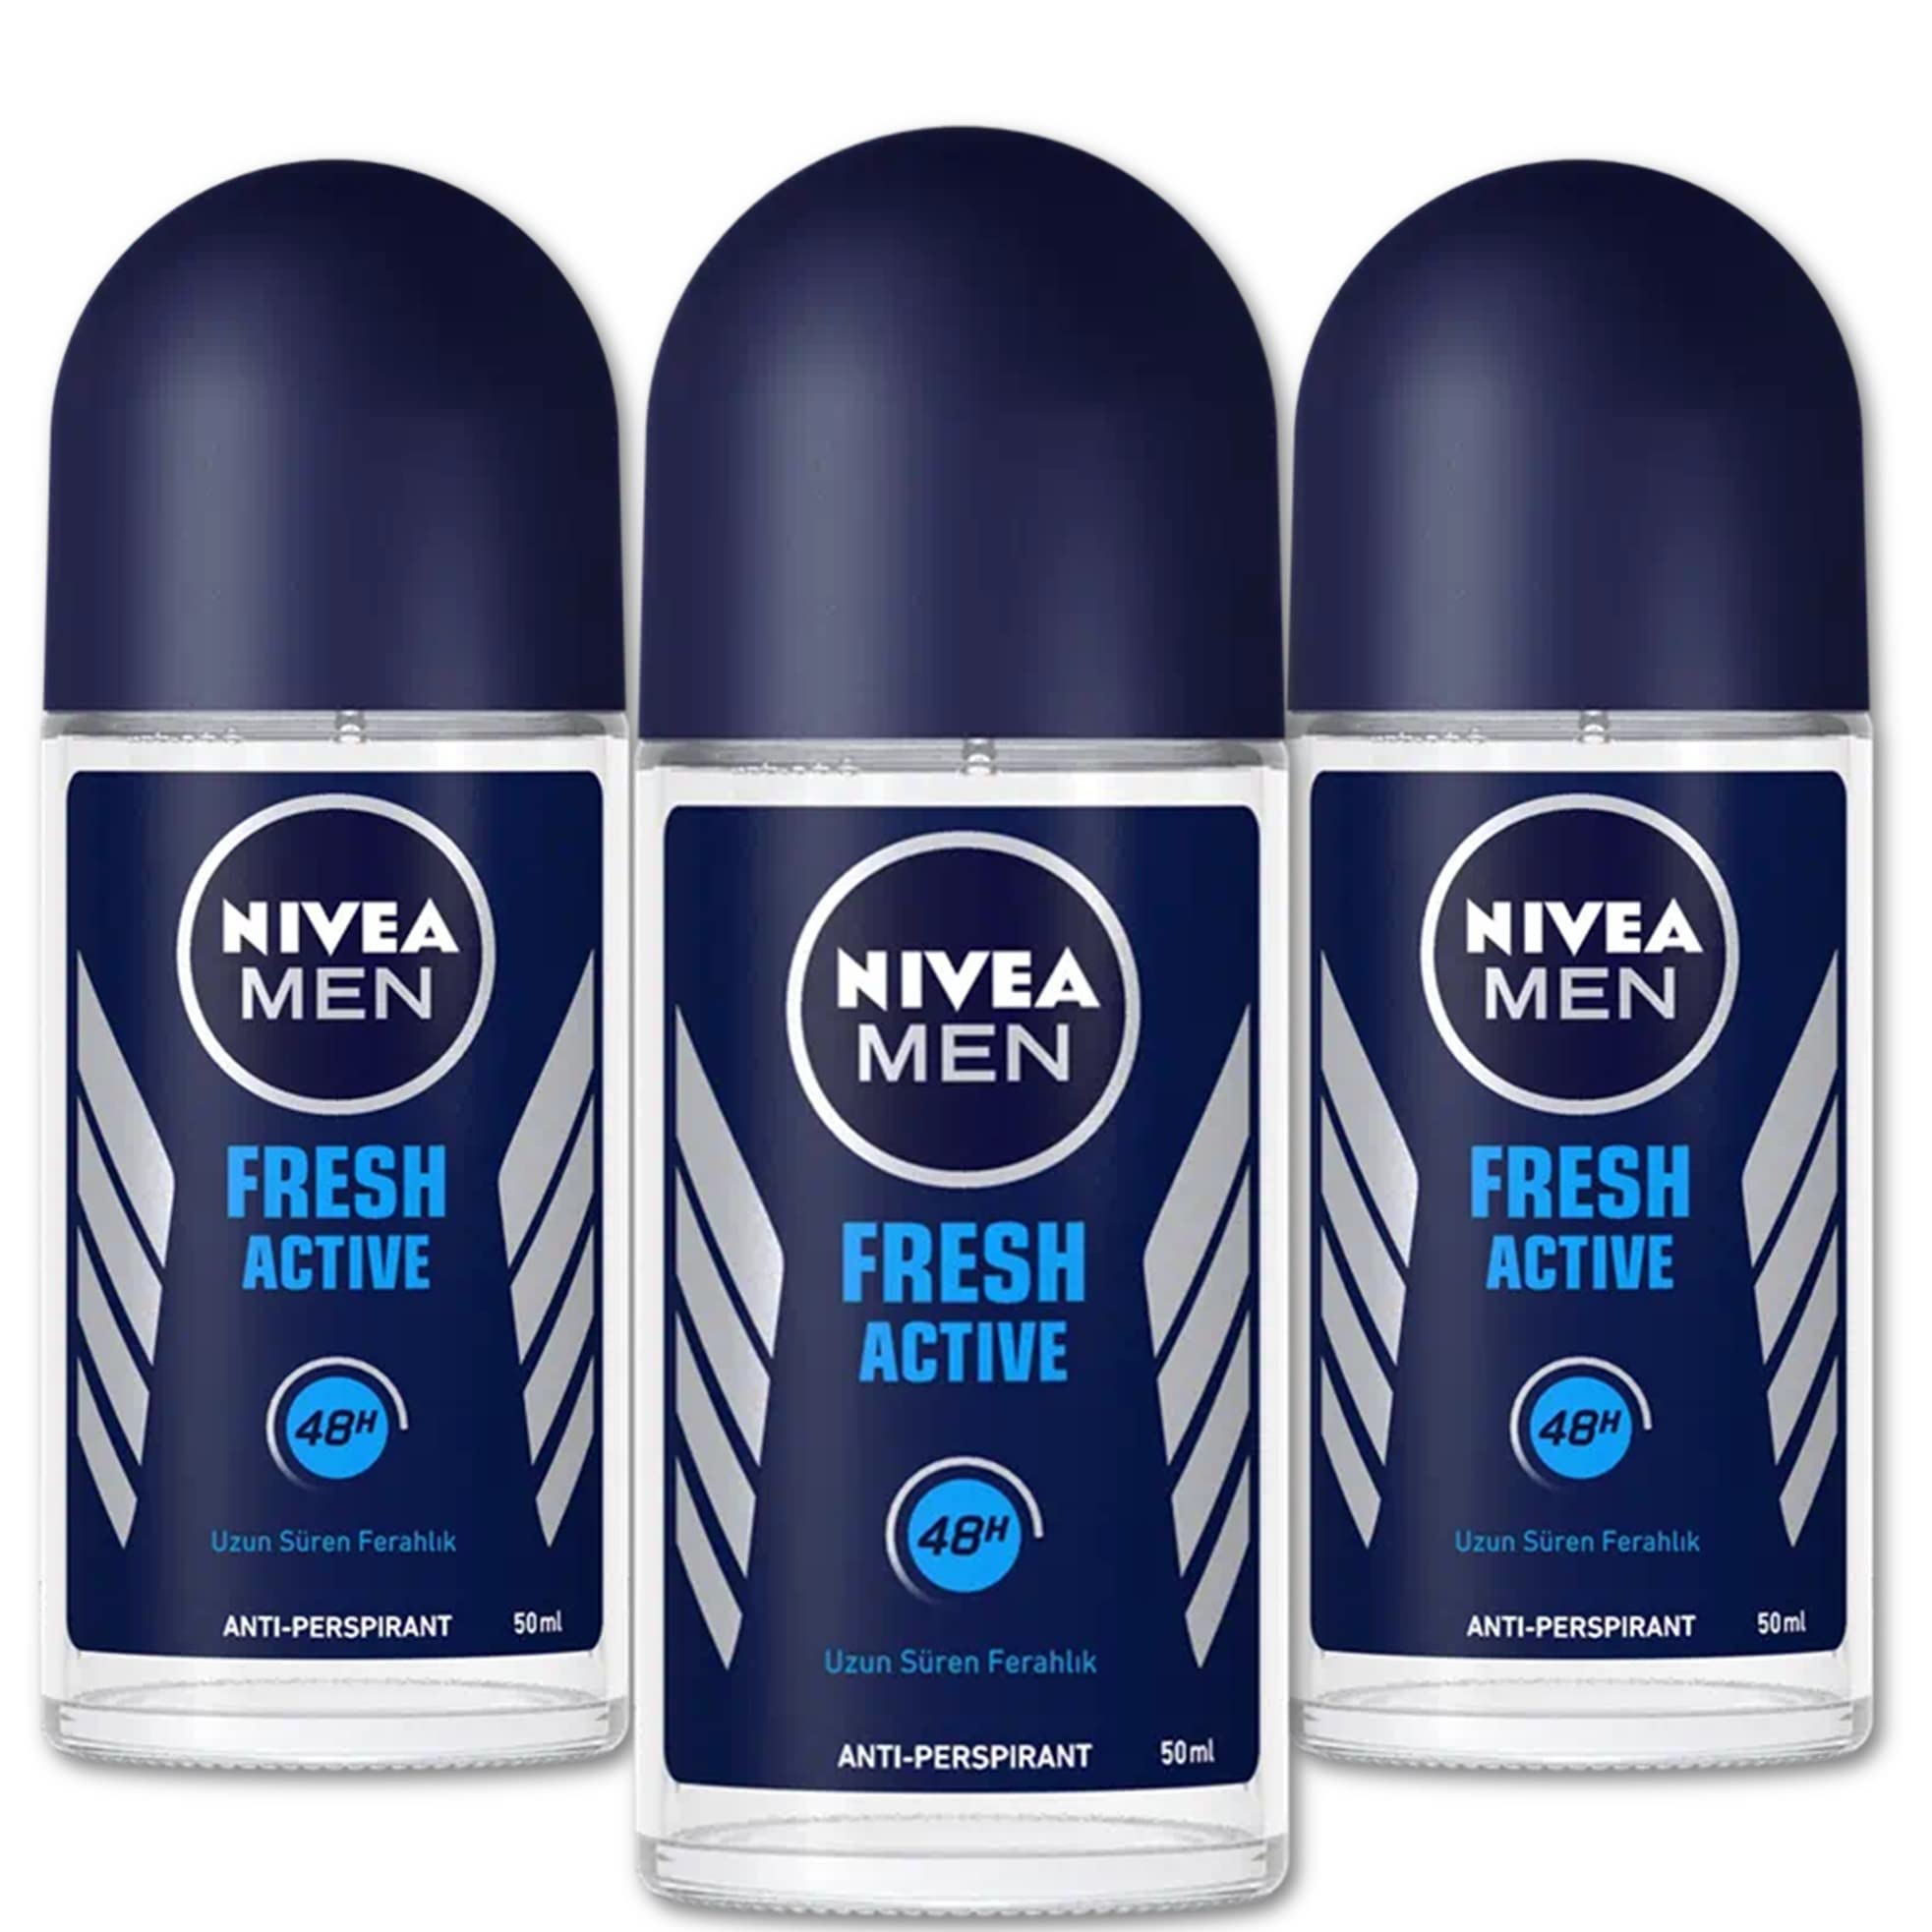 Nivea Men Anti Perspirant Roll On, Fresh Active Longlasting Freshness Ocean Extracts, 48 Hour Protection, 1.7 Ounce (Pack of 3)